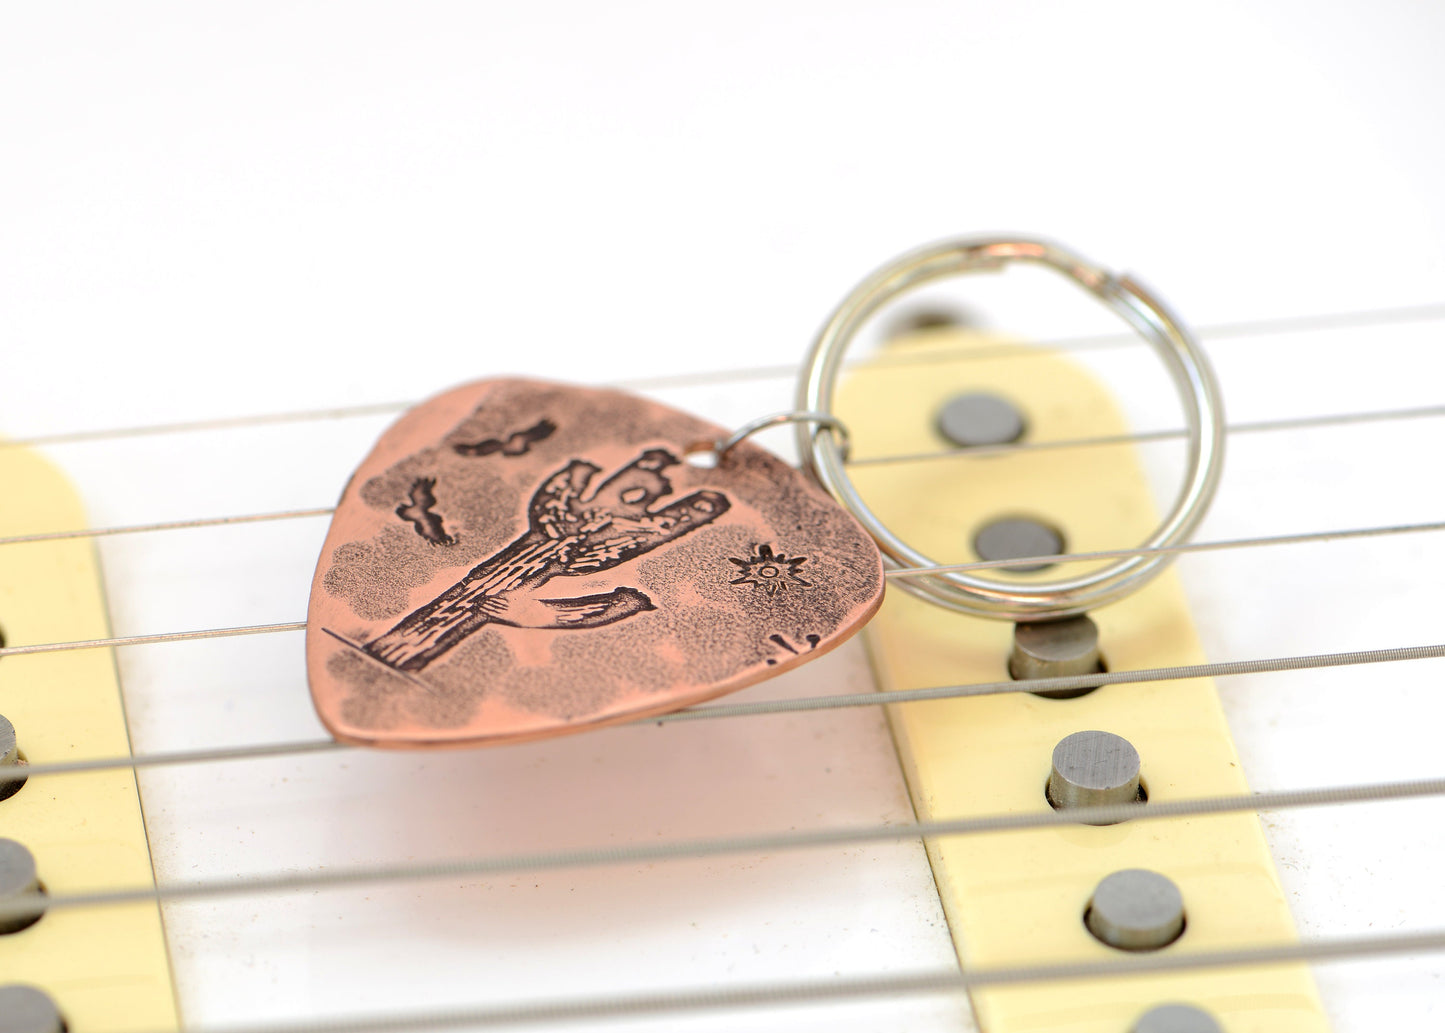 Cactus on Guitar Pick Keychain in Copper